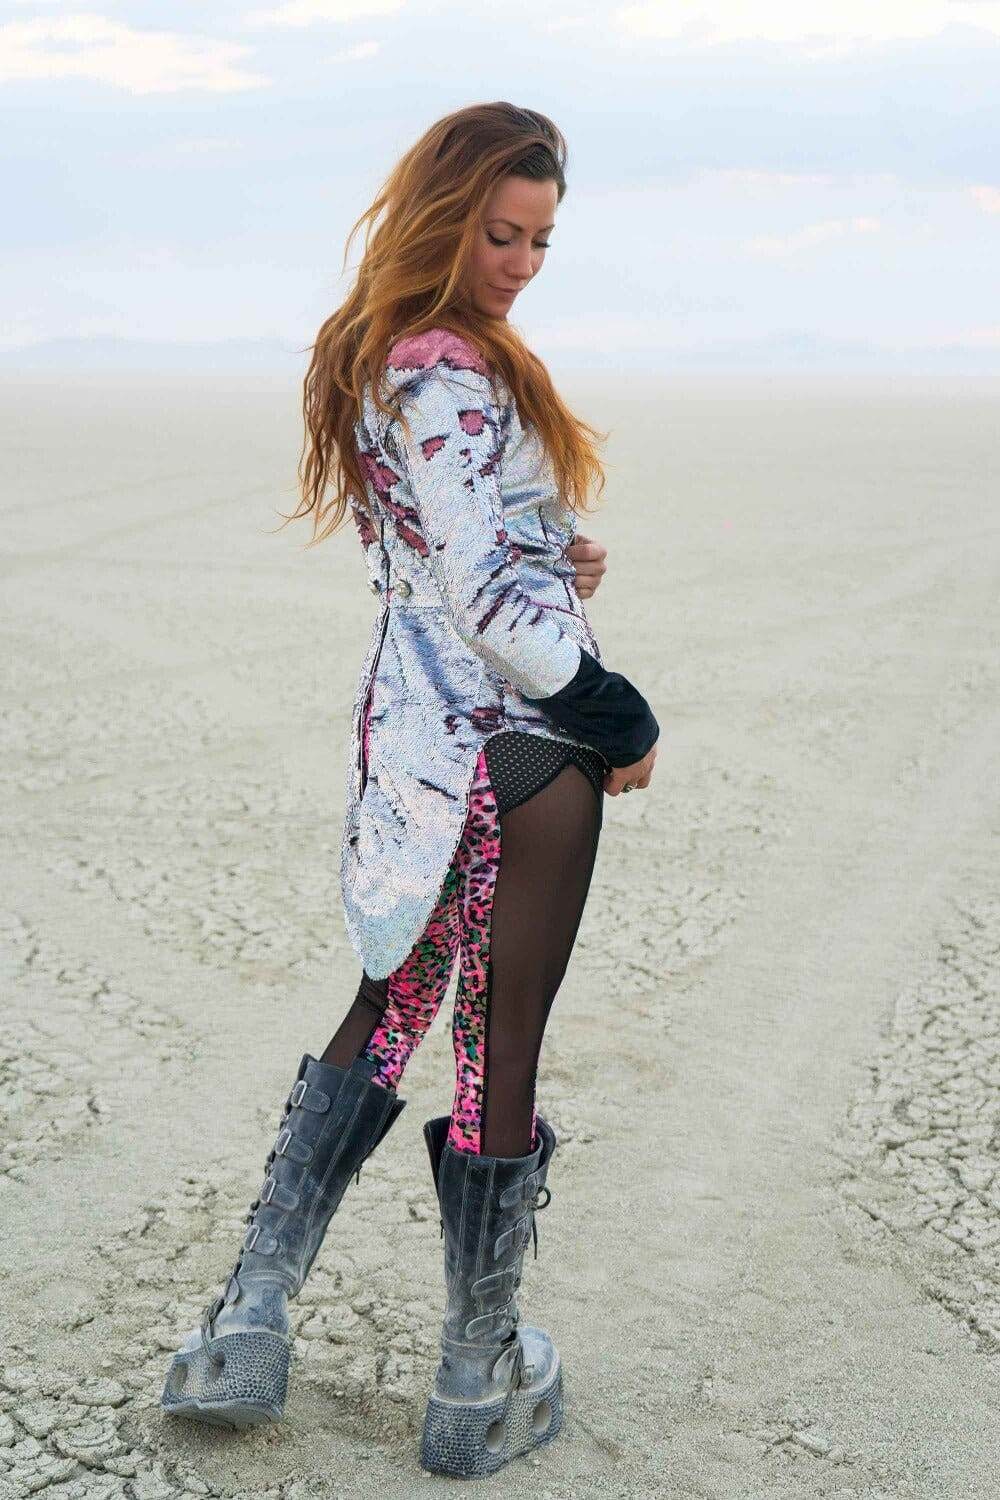 Holographic sequin jacket for Burning Man Style by Love Khaos